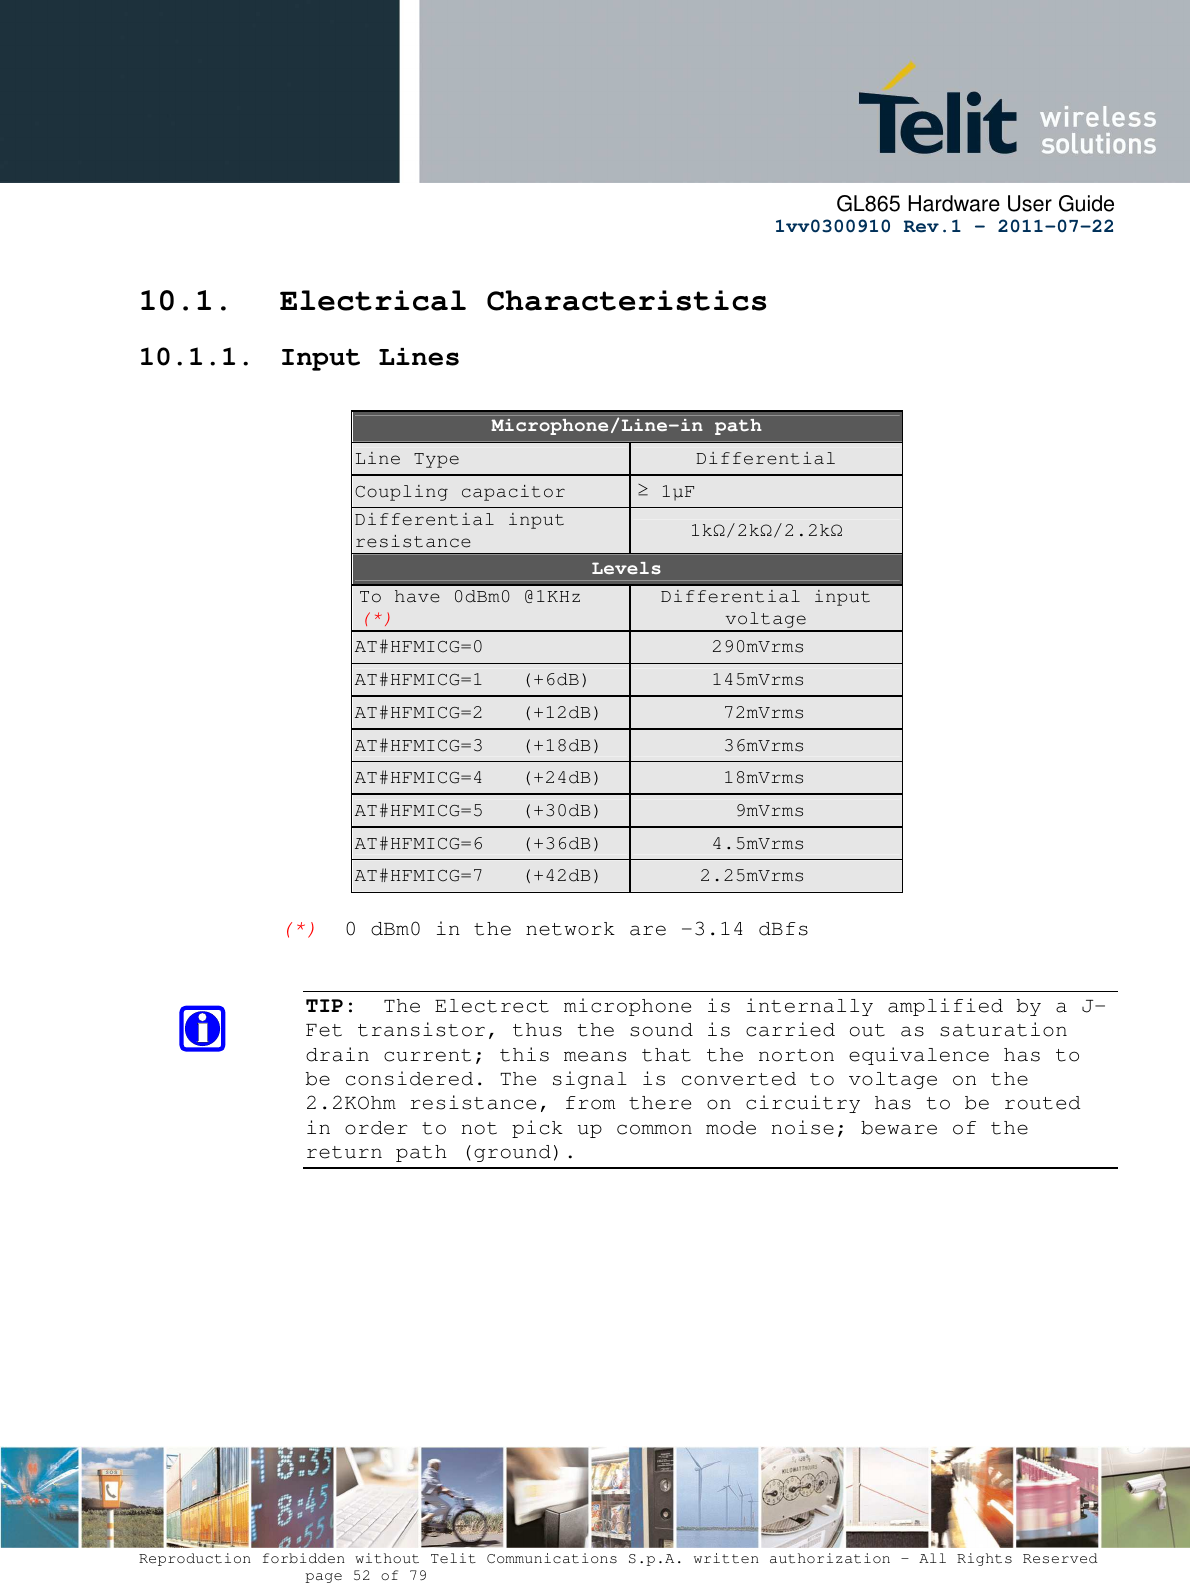      GL865 Hardware User Guide     1vv0300910 Rev.1 – 2011-07-22       Reproduction forbidden without Telit Communications S.p.A. written authorization - All Rights Reserved    page 52 of 79  10.1. Electrical Characteristics 10.1.1. Input Lines  Microphone/Line-in path Line Type  Differential Coupling capacitor  ≥ 1µF Differential input resistance  1kΩ/2kΩ/2.2kΩ Levels To have 0dBm0 @1KHz (*) Differential input voltage AT#HFMICG=0    290mVrms AT#HFMICG=1  (+6dB)    145mVrms AT#HFMICG=2  (+12dB)    72mVrms AT#HFMICG=3  (+18dB)    36mVrms AT#HFMICG=4  (+24dB)    18mVrms AT#HFMICG=5  (+30dB)    9mVrms AT#HFMICG=6  (+36dB)    4.5mVrms AT#HFMICG=7  (+42dB)    2.25mVrms  (*)  0 dBm0 in the network are -3.14 dBfs   TIP:  The Electrect microphone is internally amplified by a J-Fet transistor, thus the sound is carried out as saturation drain current; this means that the norton equivalence has to be considered. The signal is converted to voltage on the 2.2KOhm resistance, from there on circuitry has to be routed in order to not pick up common mode noise; beware of the return path (ground).            